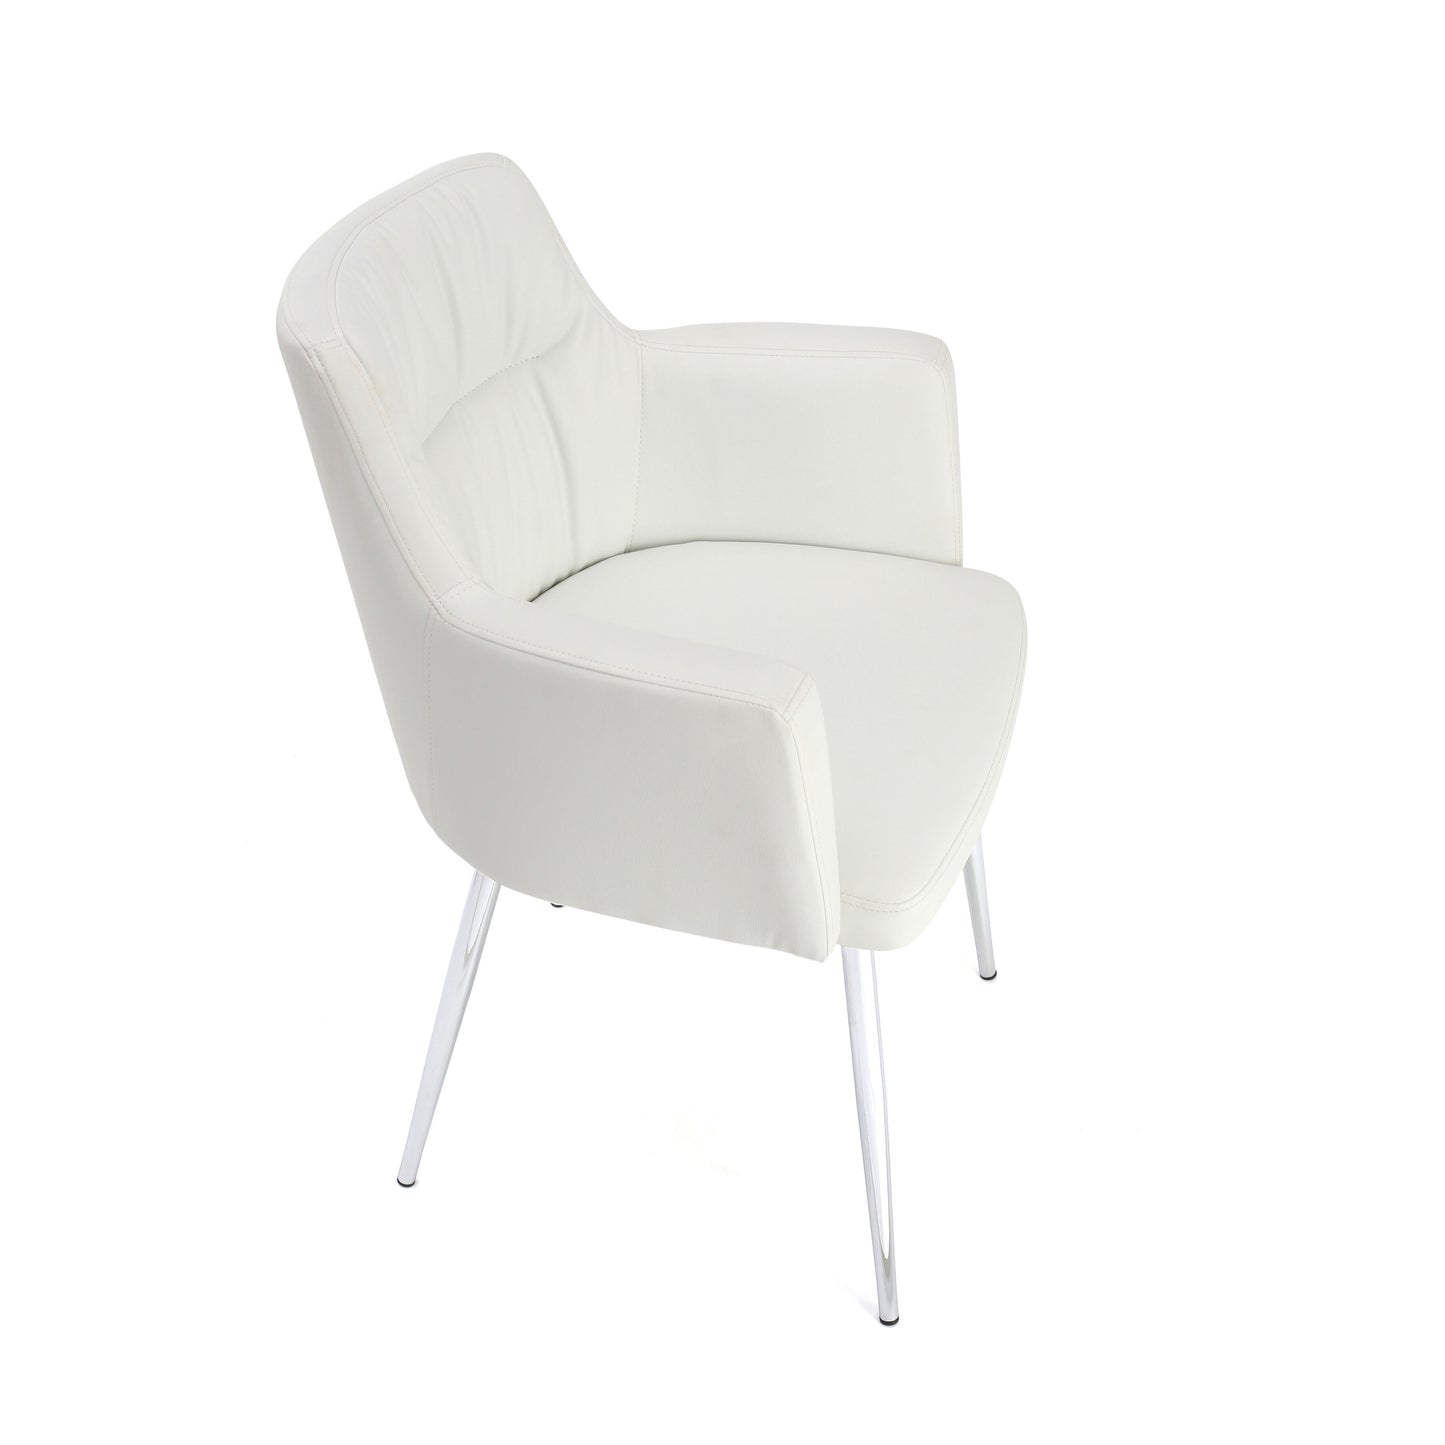 White Leather Effect Chair With Chrome Legs - NIXO Furniture.com